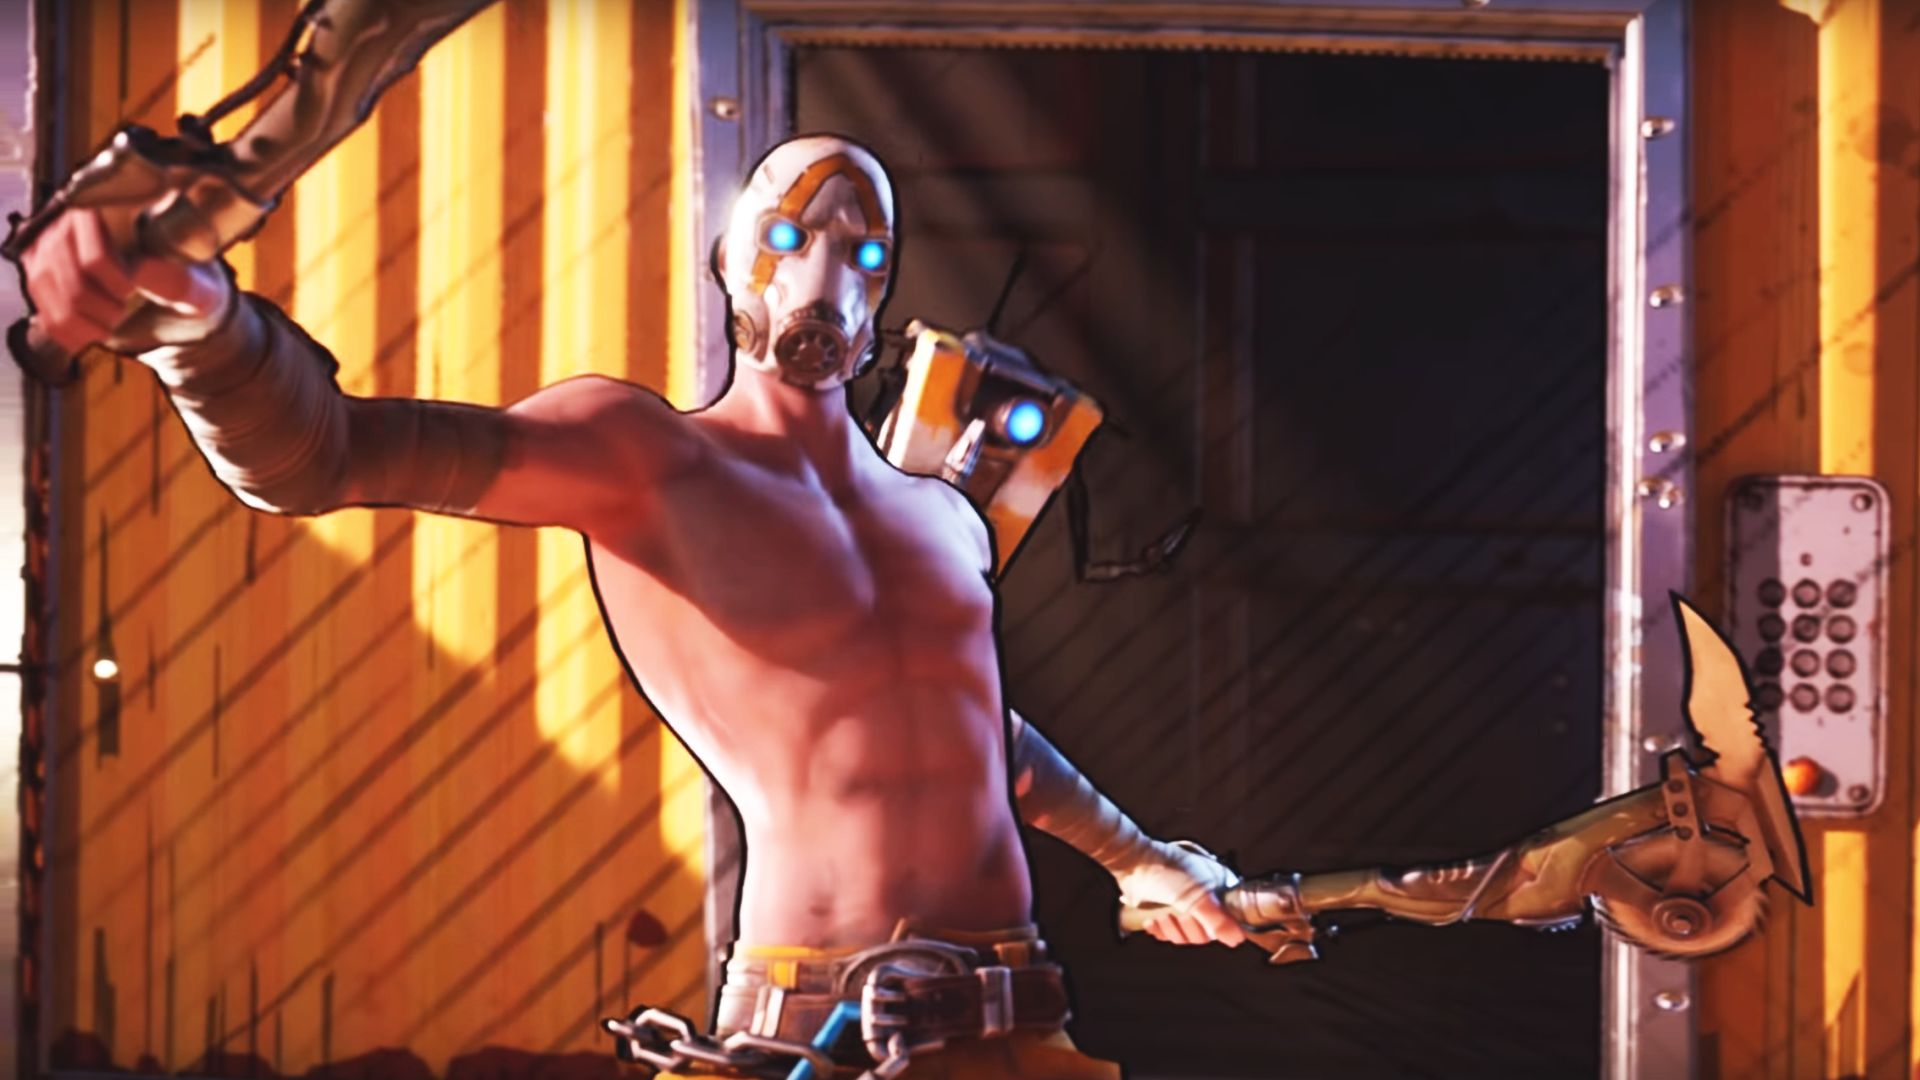 Claptrap’s as annoying as ever in Fortnite’s Borderlands 3 crossover